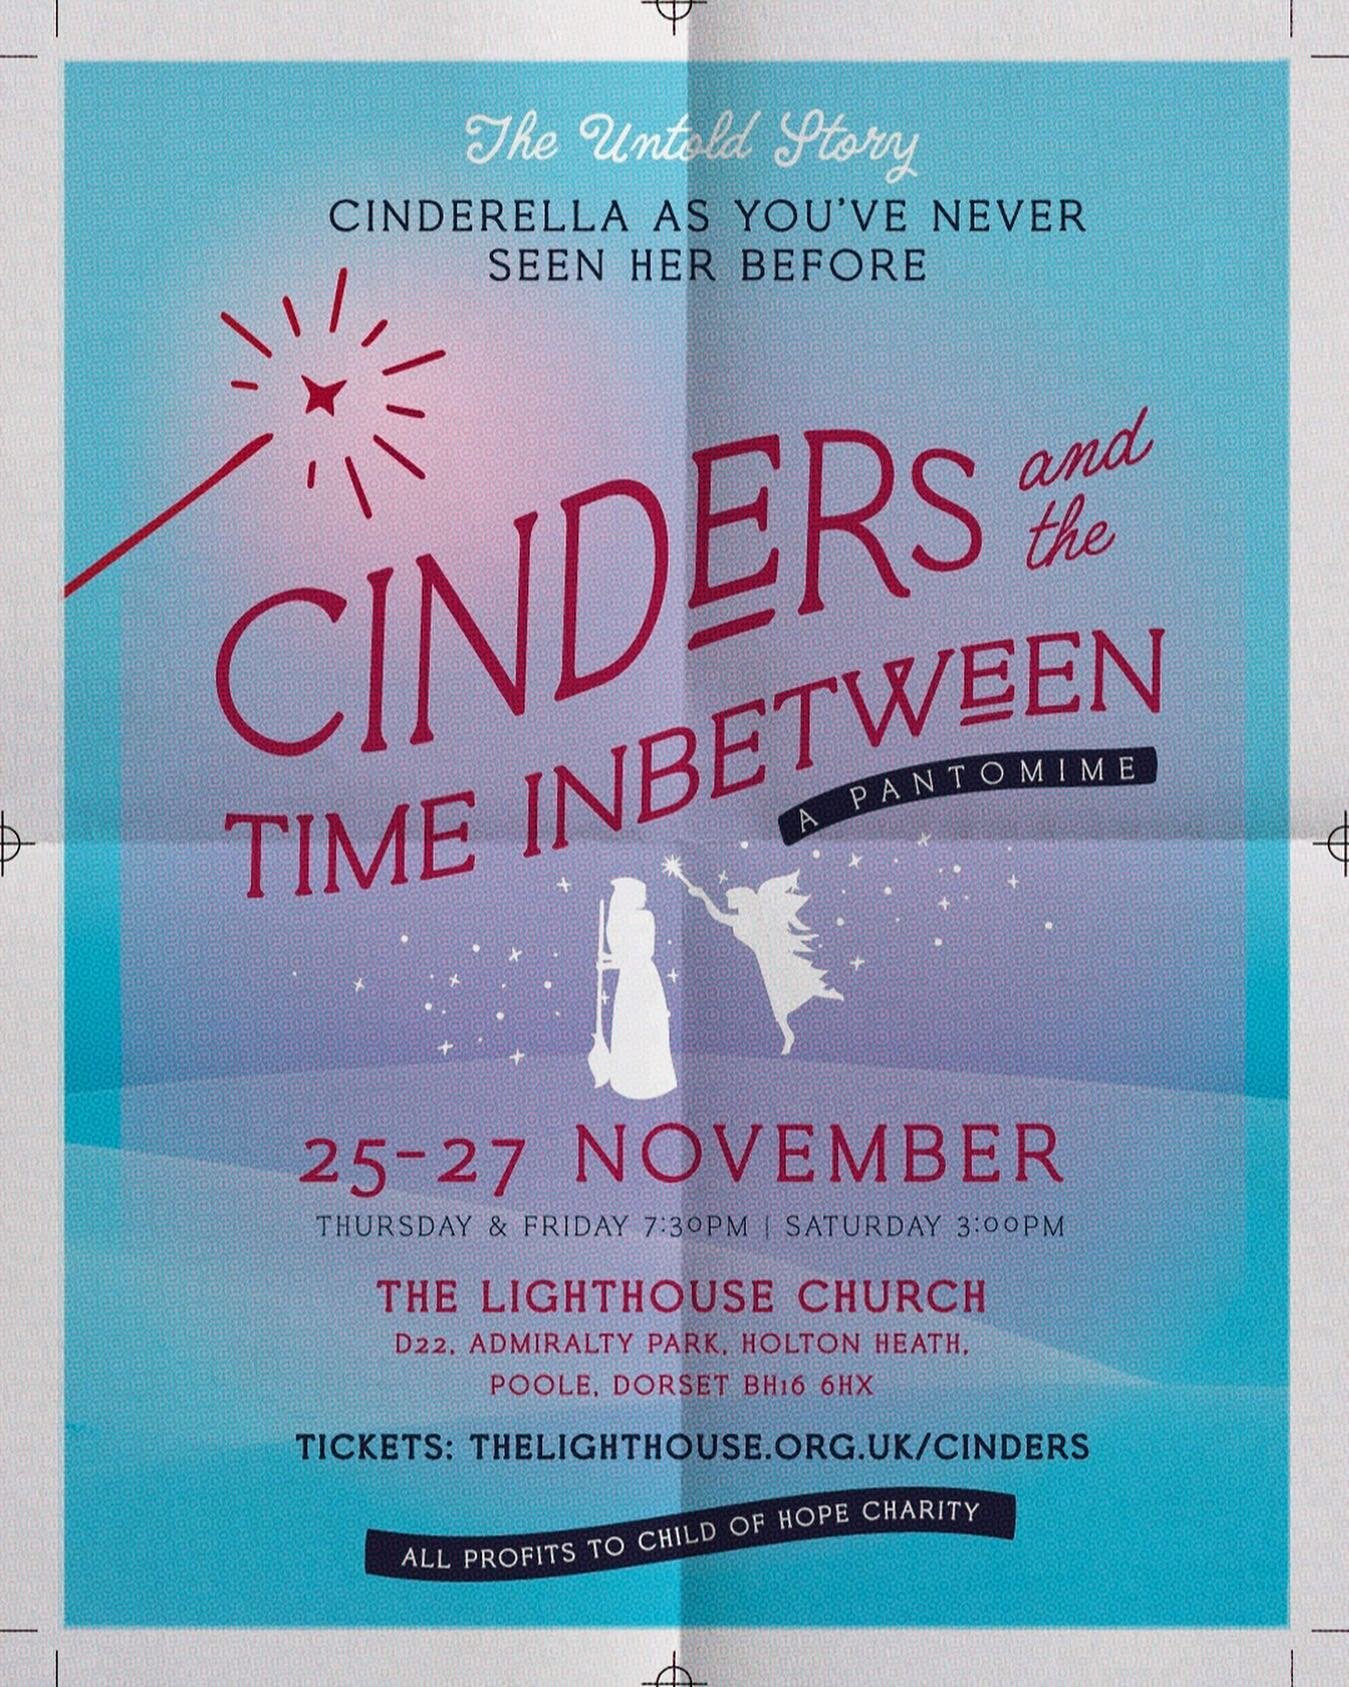 SATURDAY IS SOLD OUT!
But you can still catch the show, Thursday (25th) and Friday (26th)!

Cinders and the Time Inbetween

THE UNTOLD STORY: CINDERELLA AS YOU&rsquo;VE NEVER SEEN HER BEFORE

All profits will go to&nbsp;@childofhopeuganda

This is a 